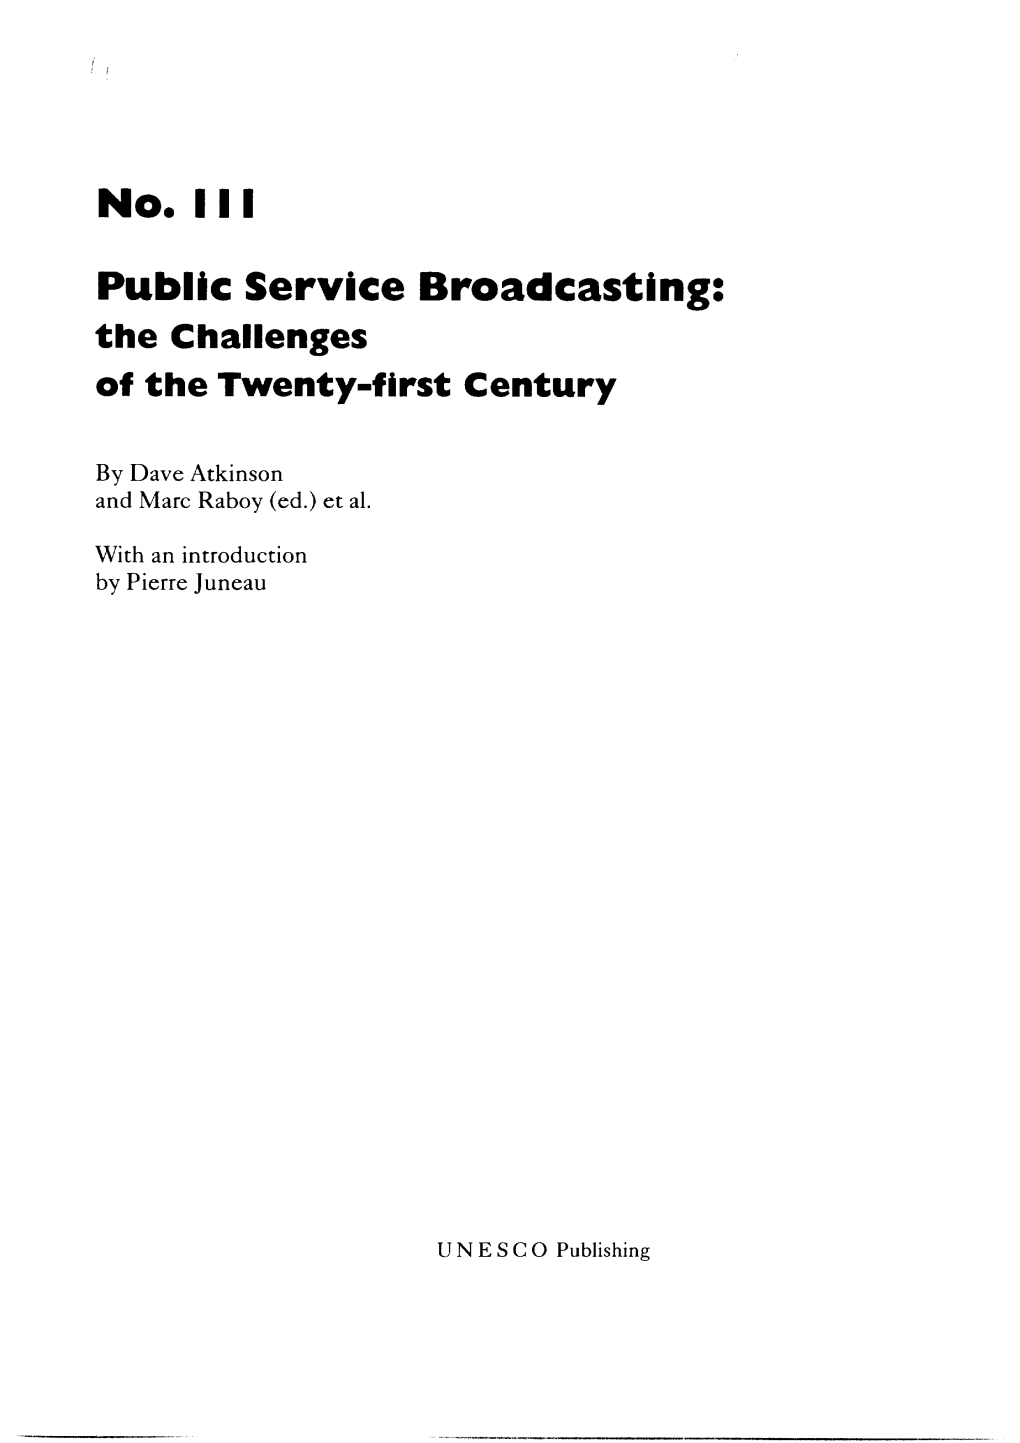 Public Service Broadcasting: the Challenges of the Twenty-First Century